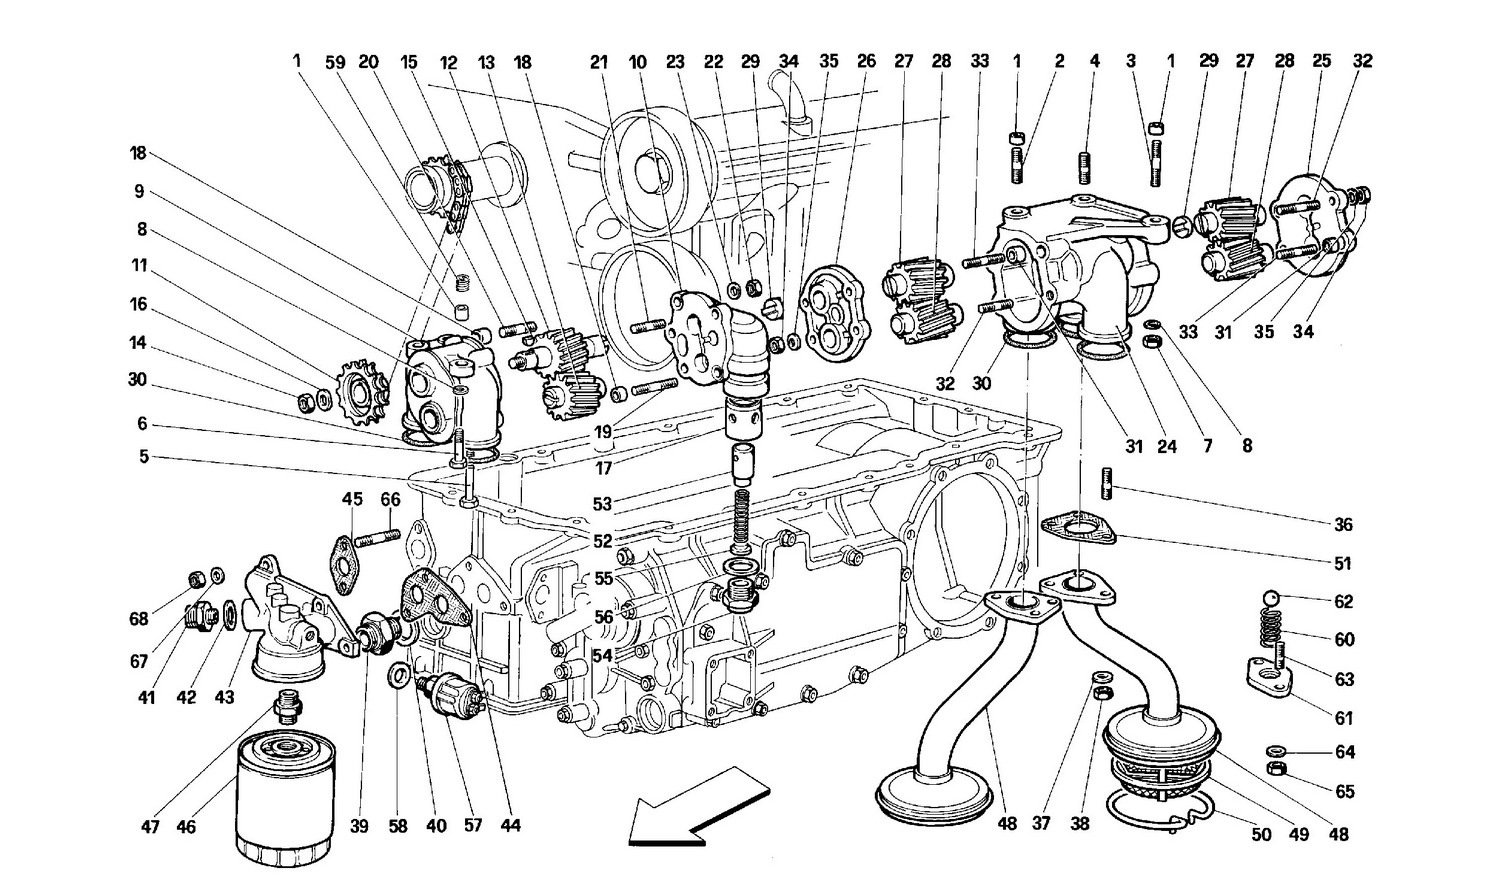 Schematic: Lubrication - Pumps And Oil Filter